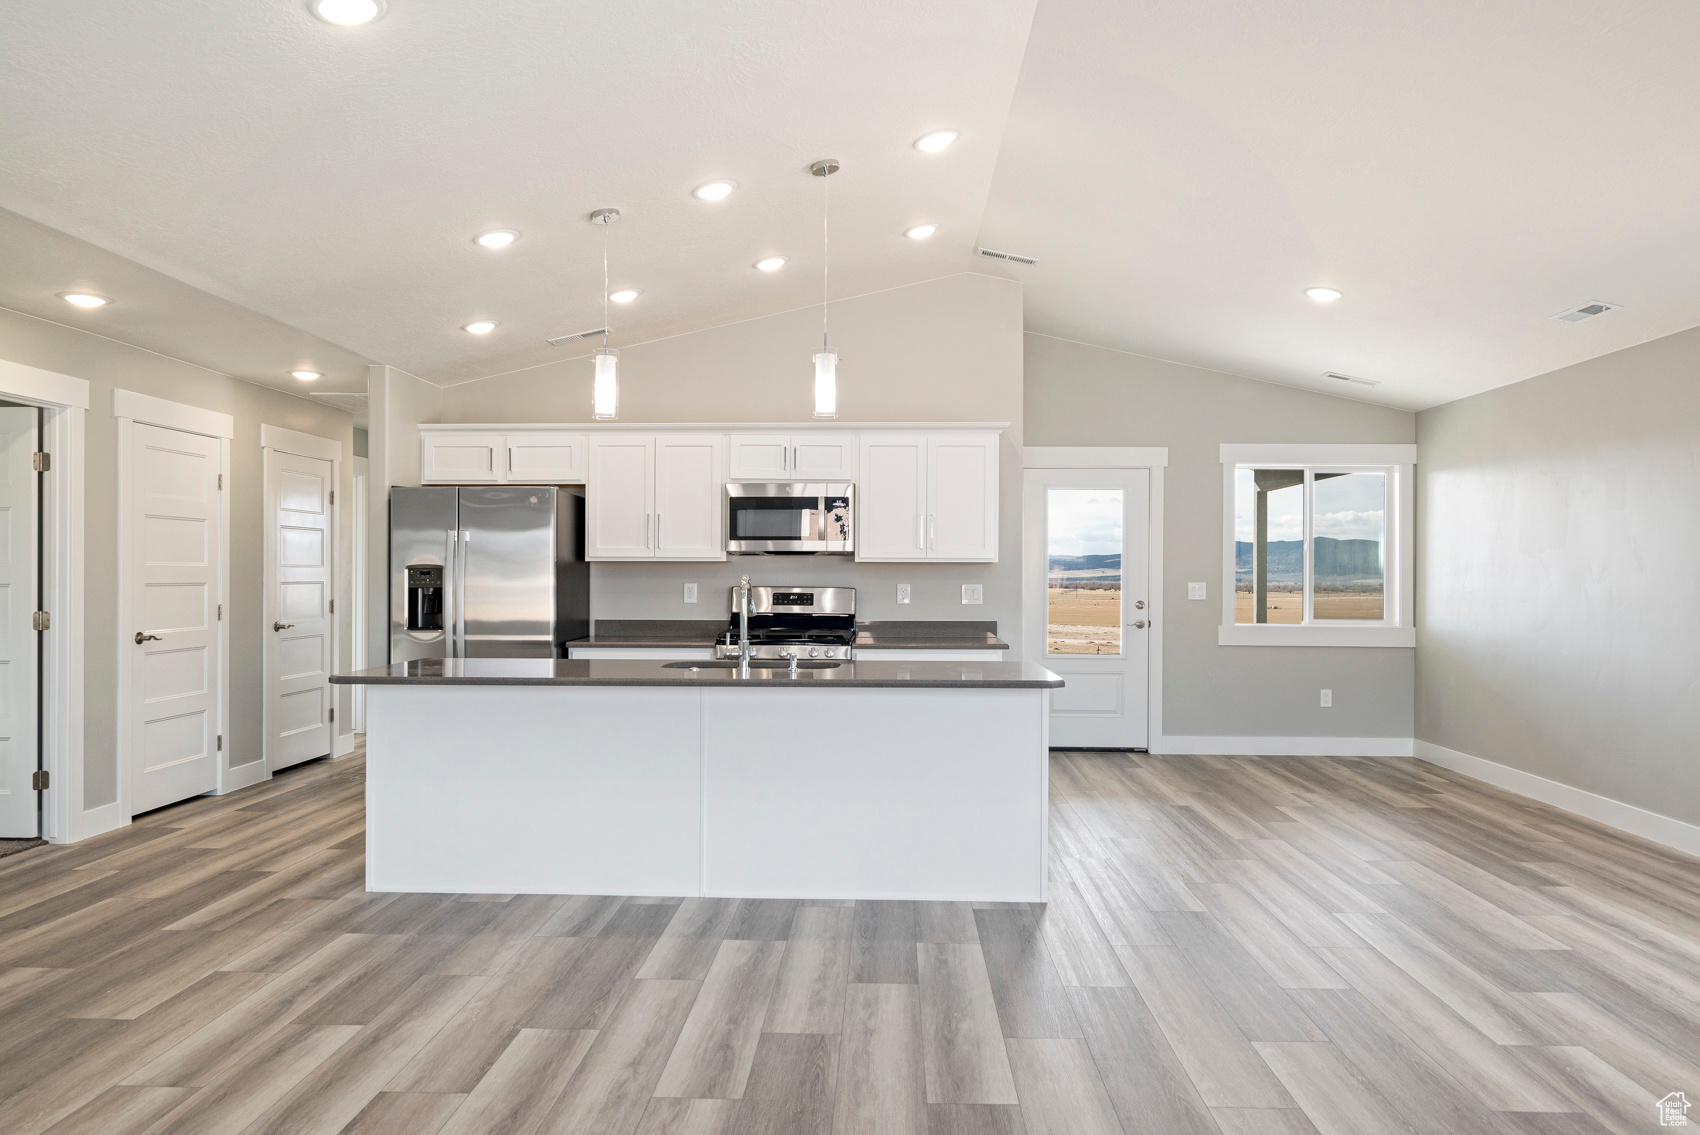 Kitchen featuring white cabinets, light hardwood / wood-style flooring, stainless steel appliances, vaulted ceiling, and an island with sink